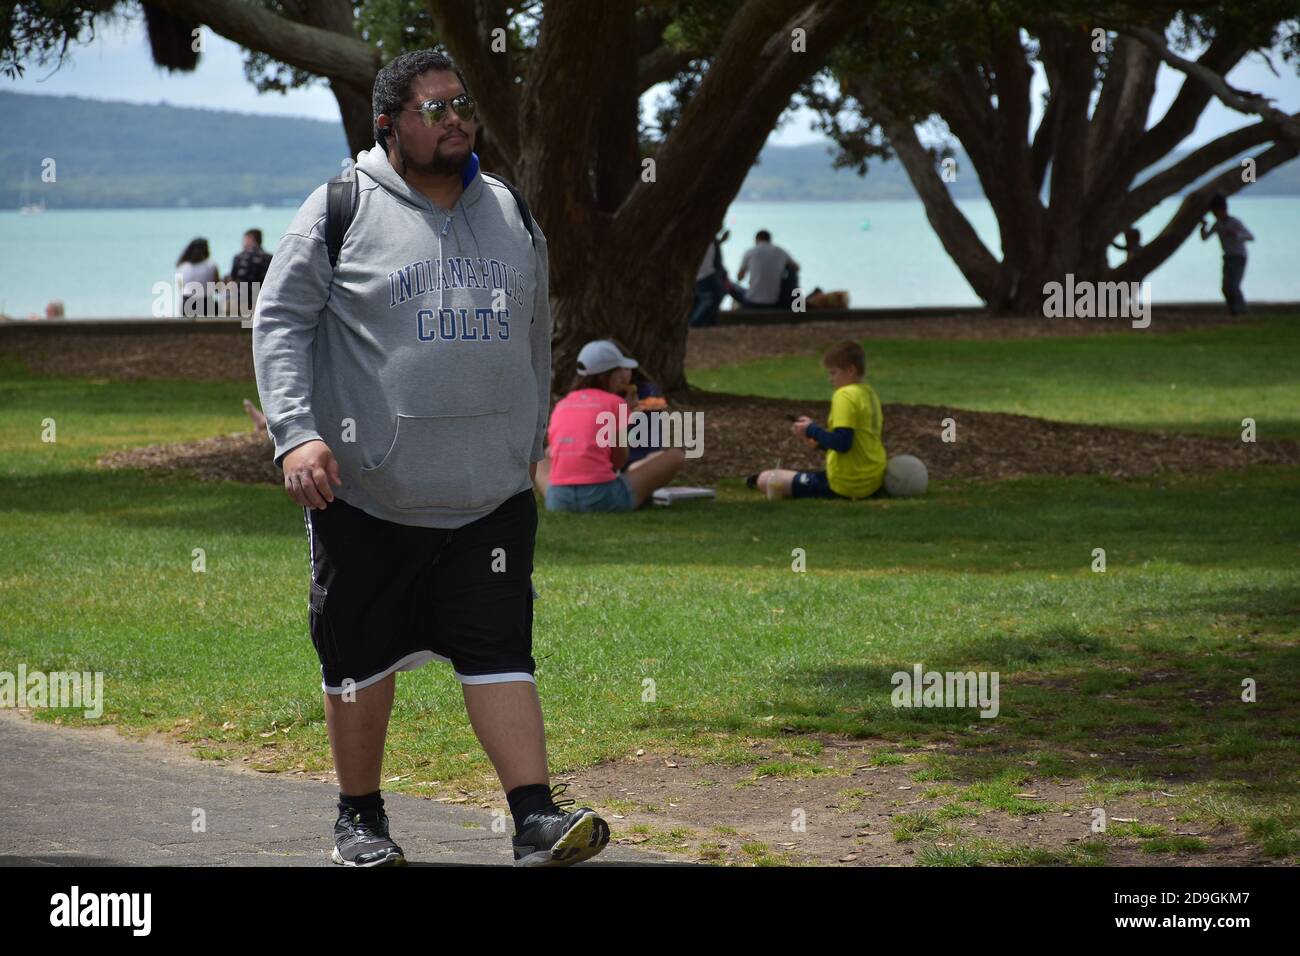 AUCKLAND, NEW ZEALAND - Nov 01, 2020: View of man walking on path in park at Mission Bay Beach Stock Photo